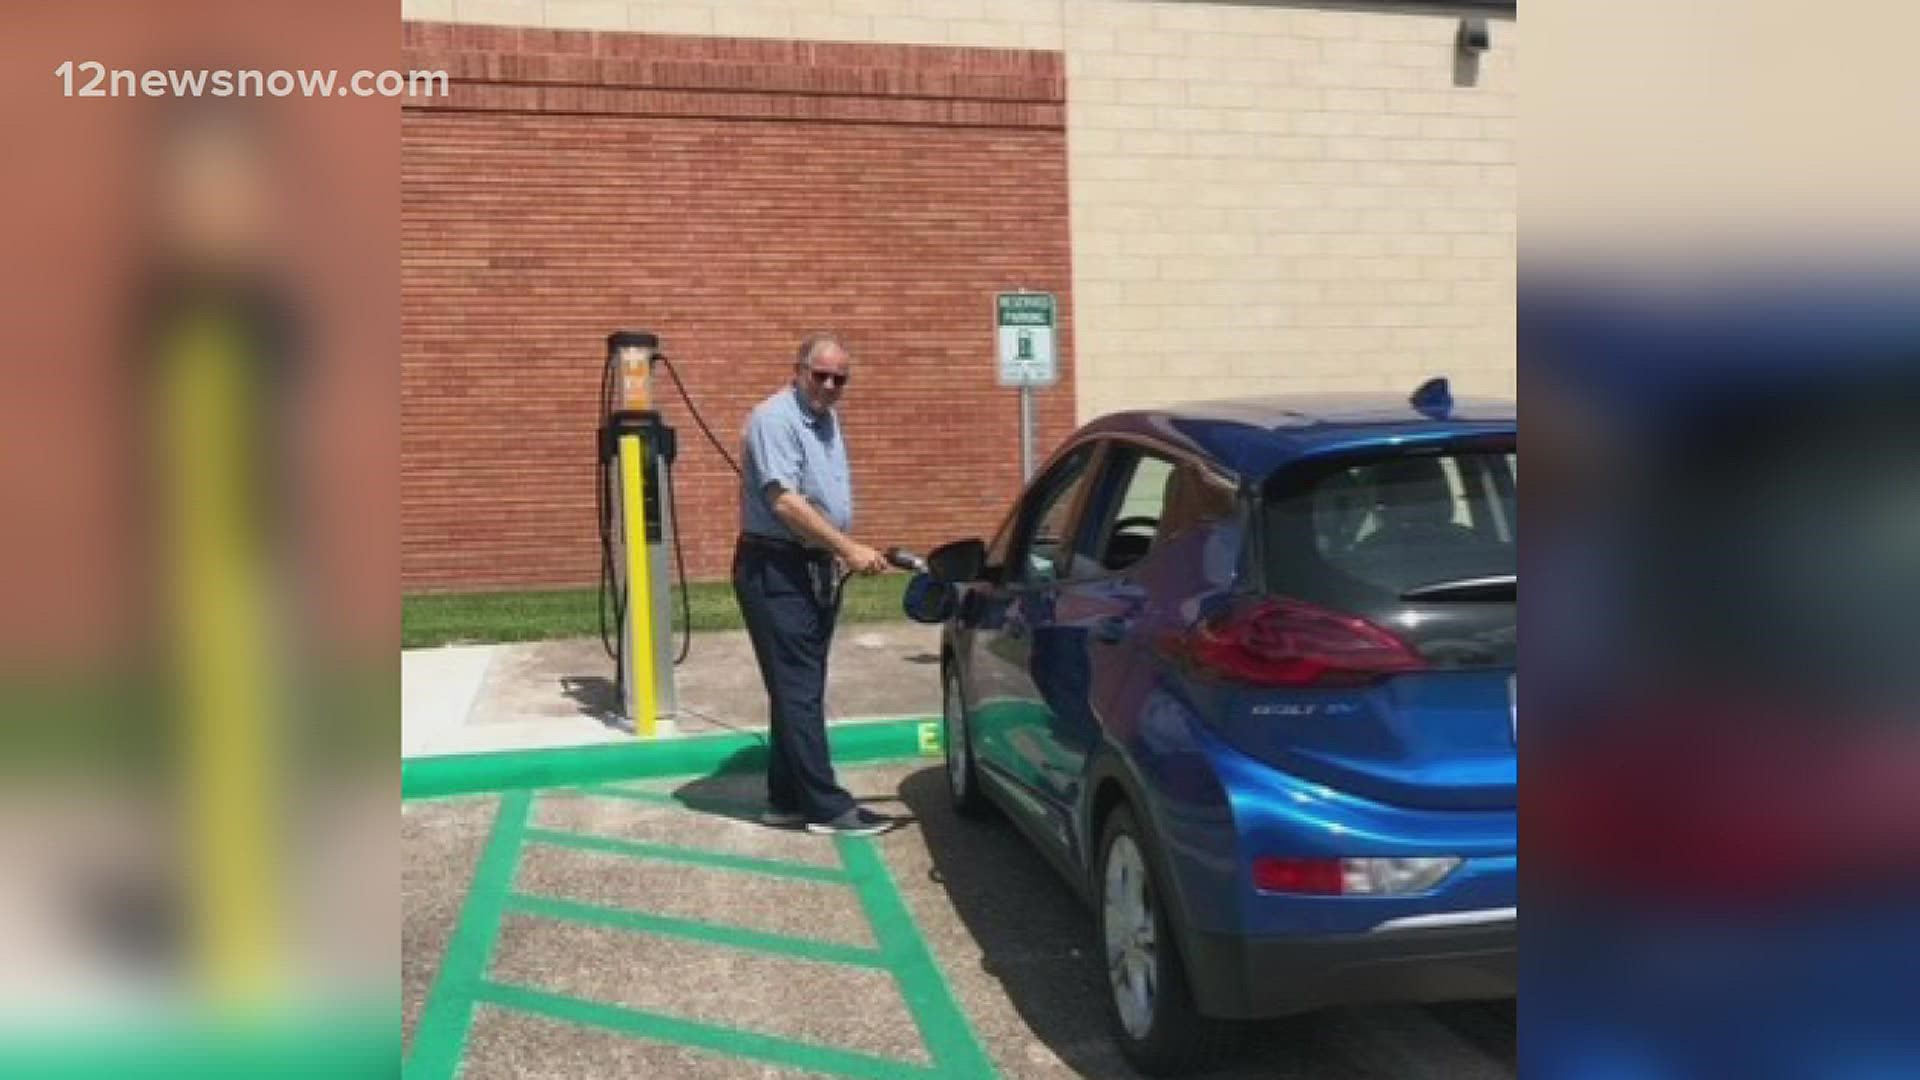 Electric vehicle drivers in Southeast Texas now have one more charging station available in the area after a second charger was added at Lamar University.